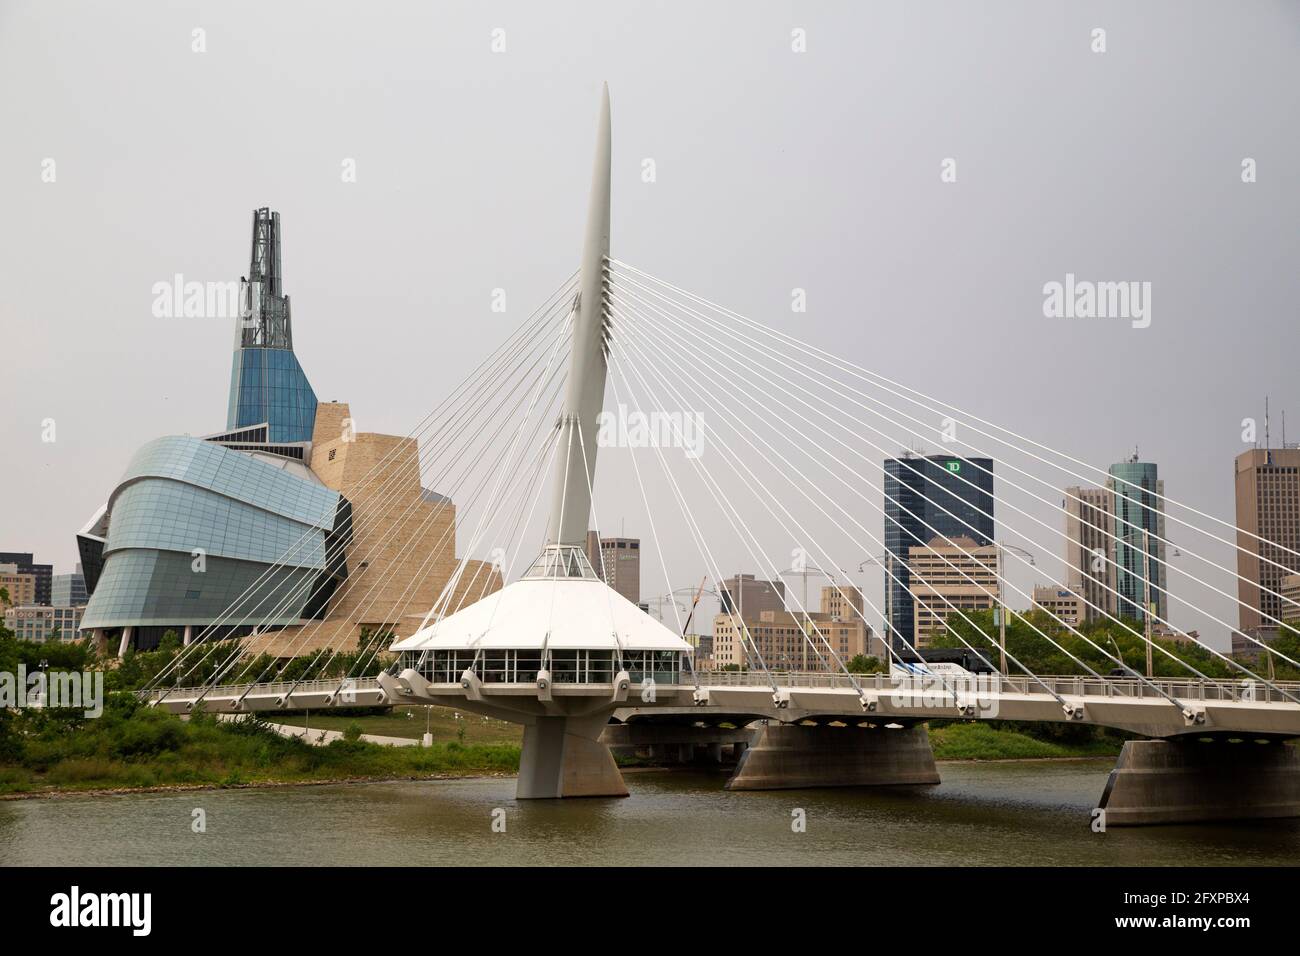 The Provecher Bridge crosses the Red River in Winnipeg, Canada. The bridge stands close to the Canadian Museum for Human Rights. Stock Photo